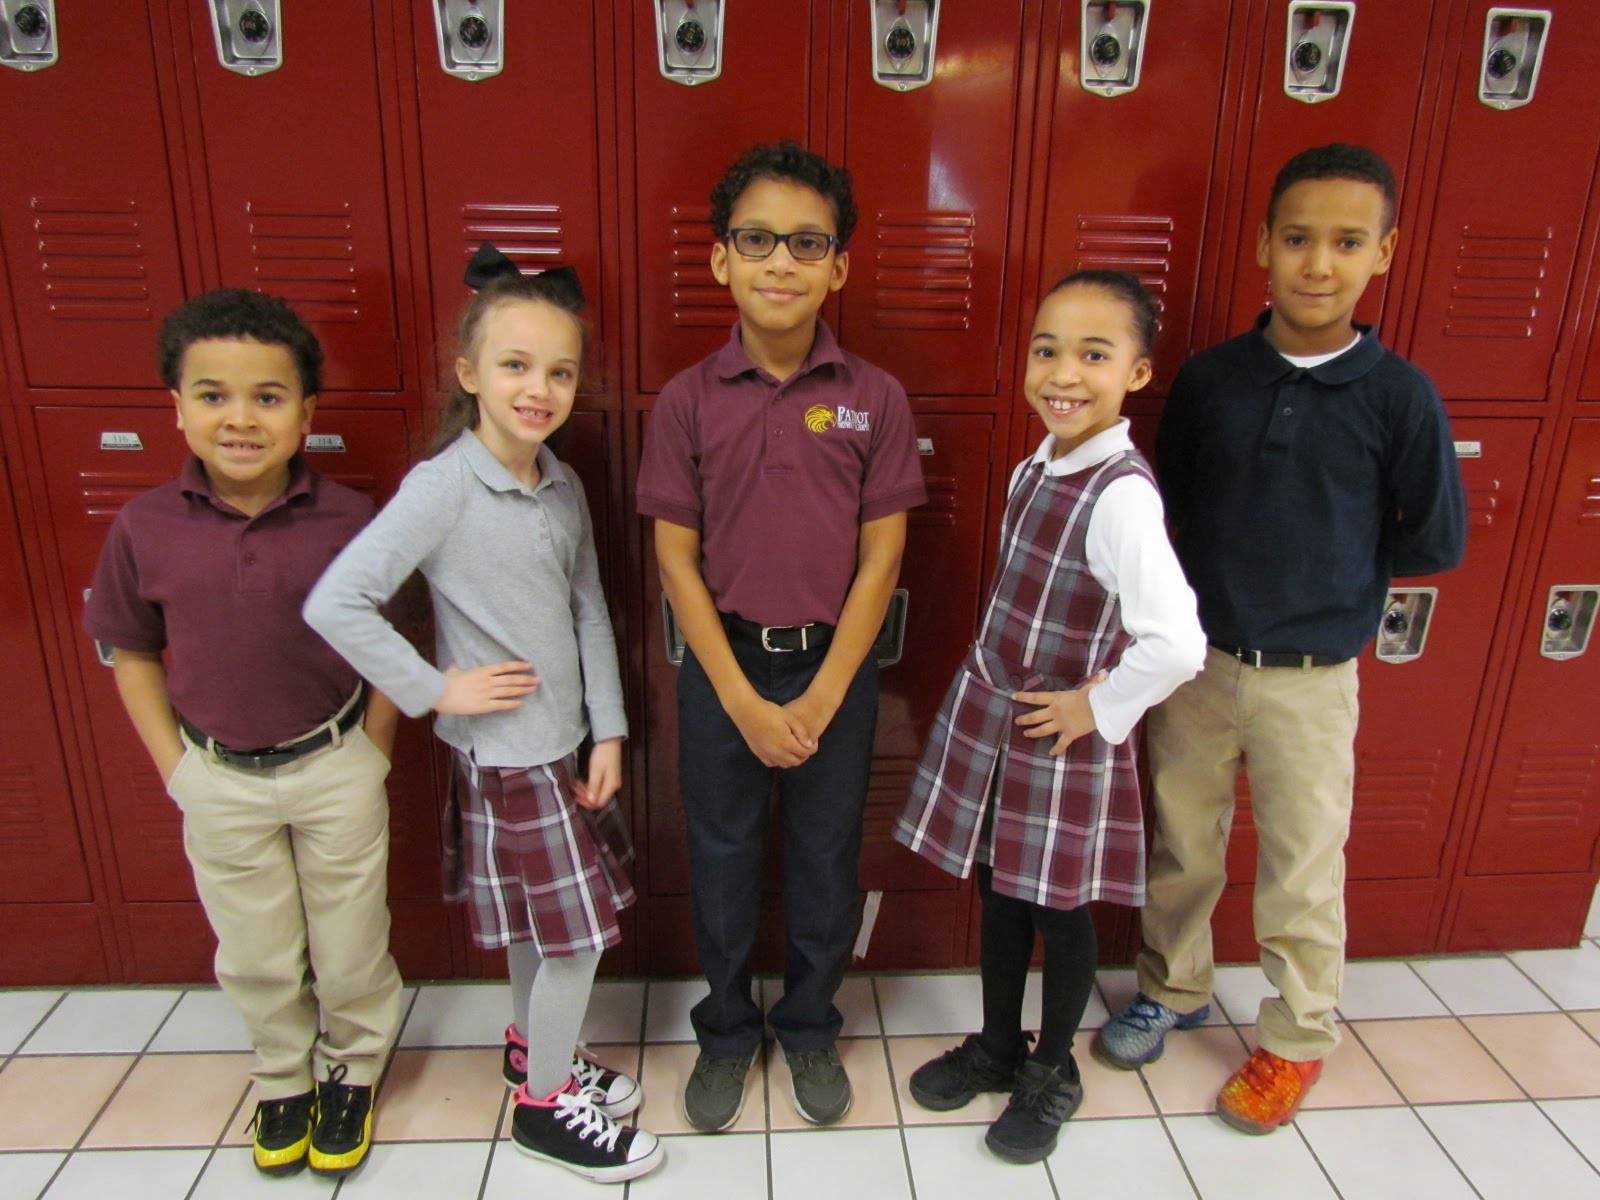 Elementary students in dress code